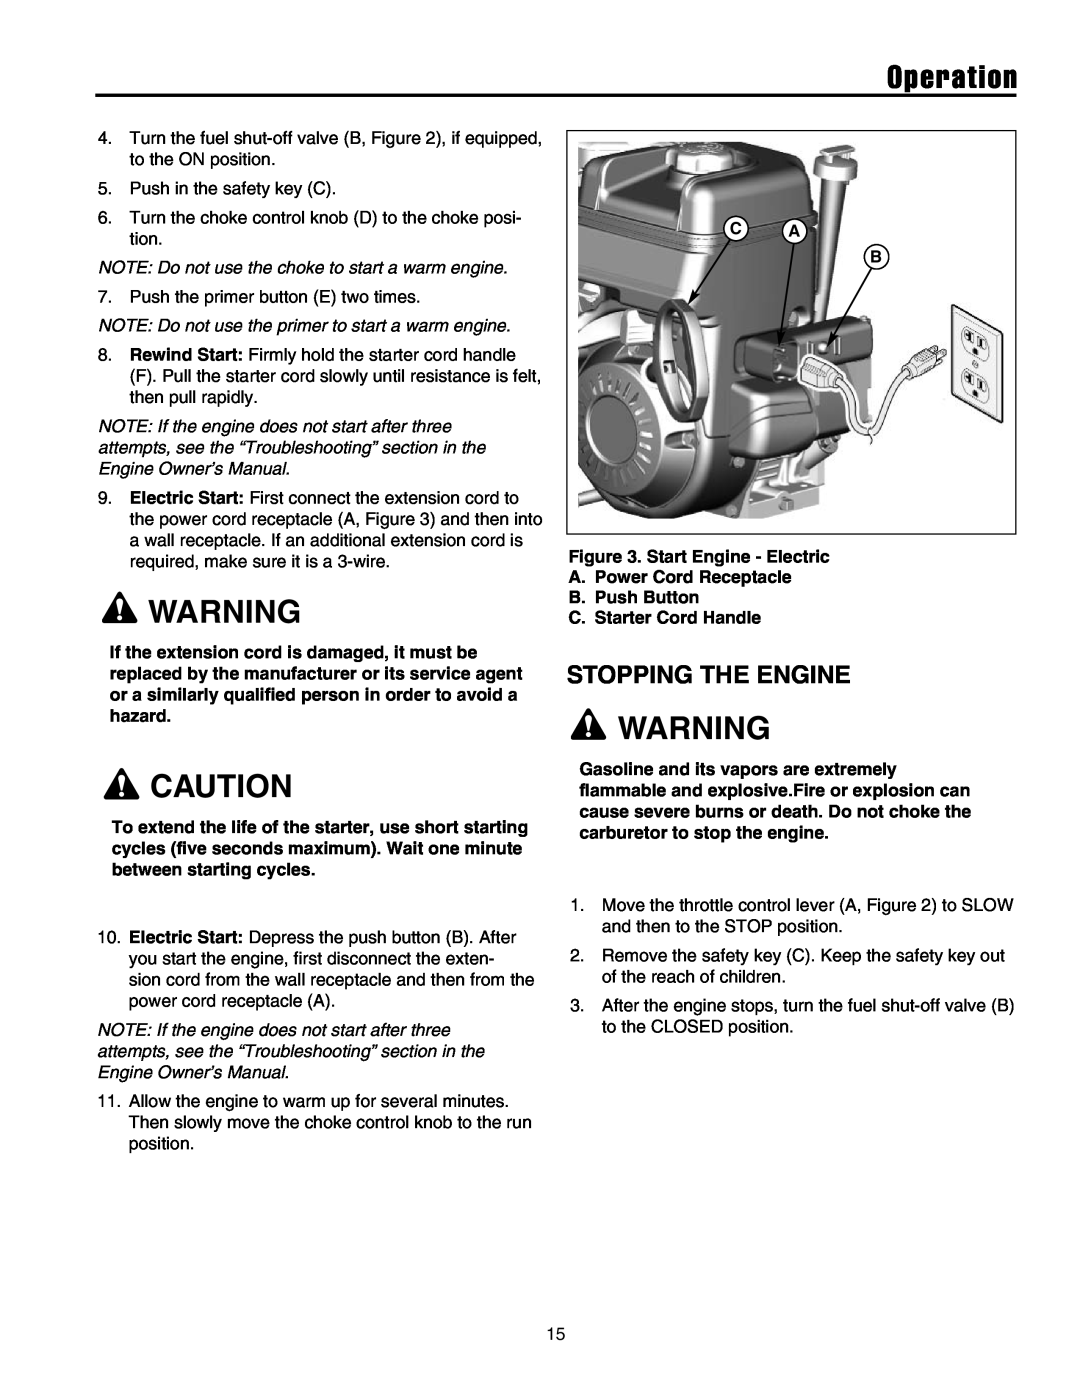 Briggs & Stratton 1732, 1738, 1628, 1524 manual Stopping The Engine, Operation 